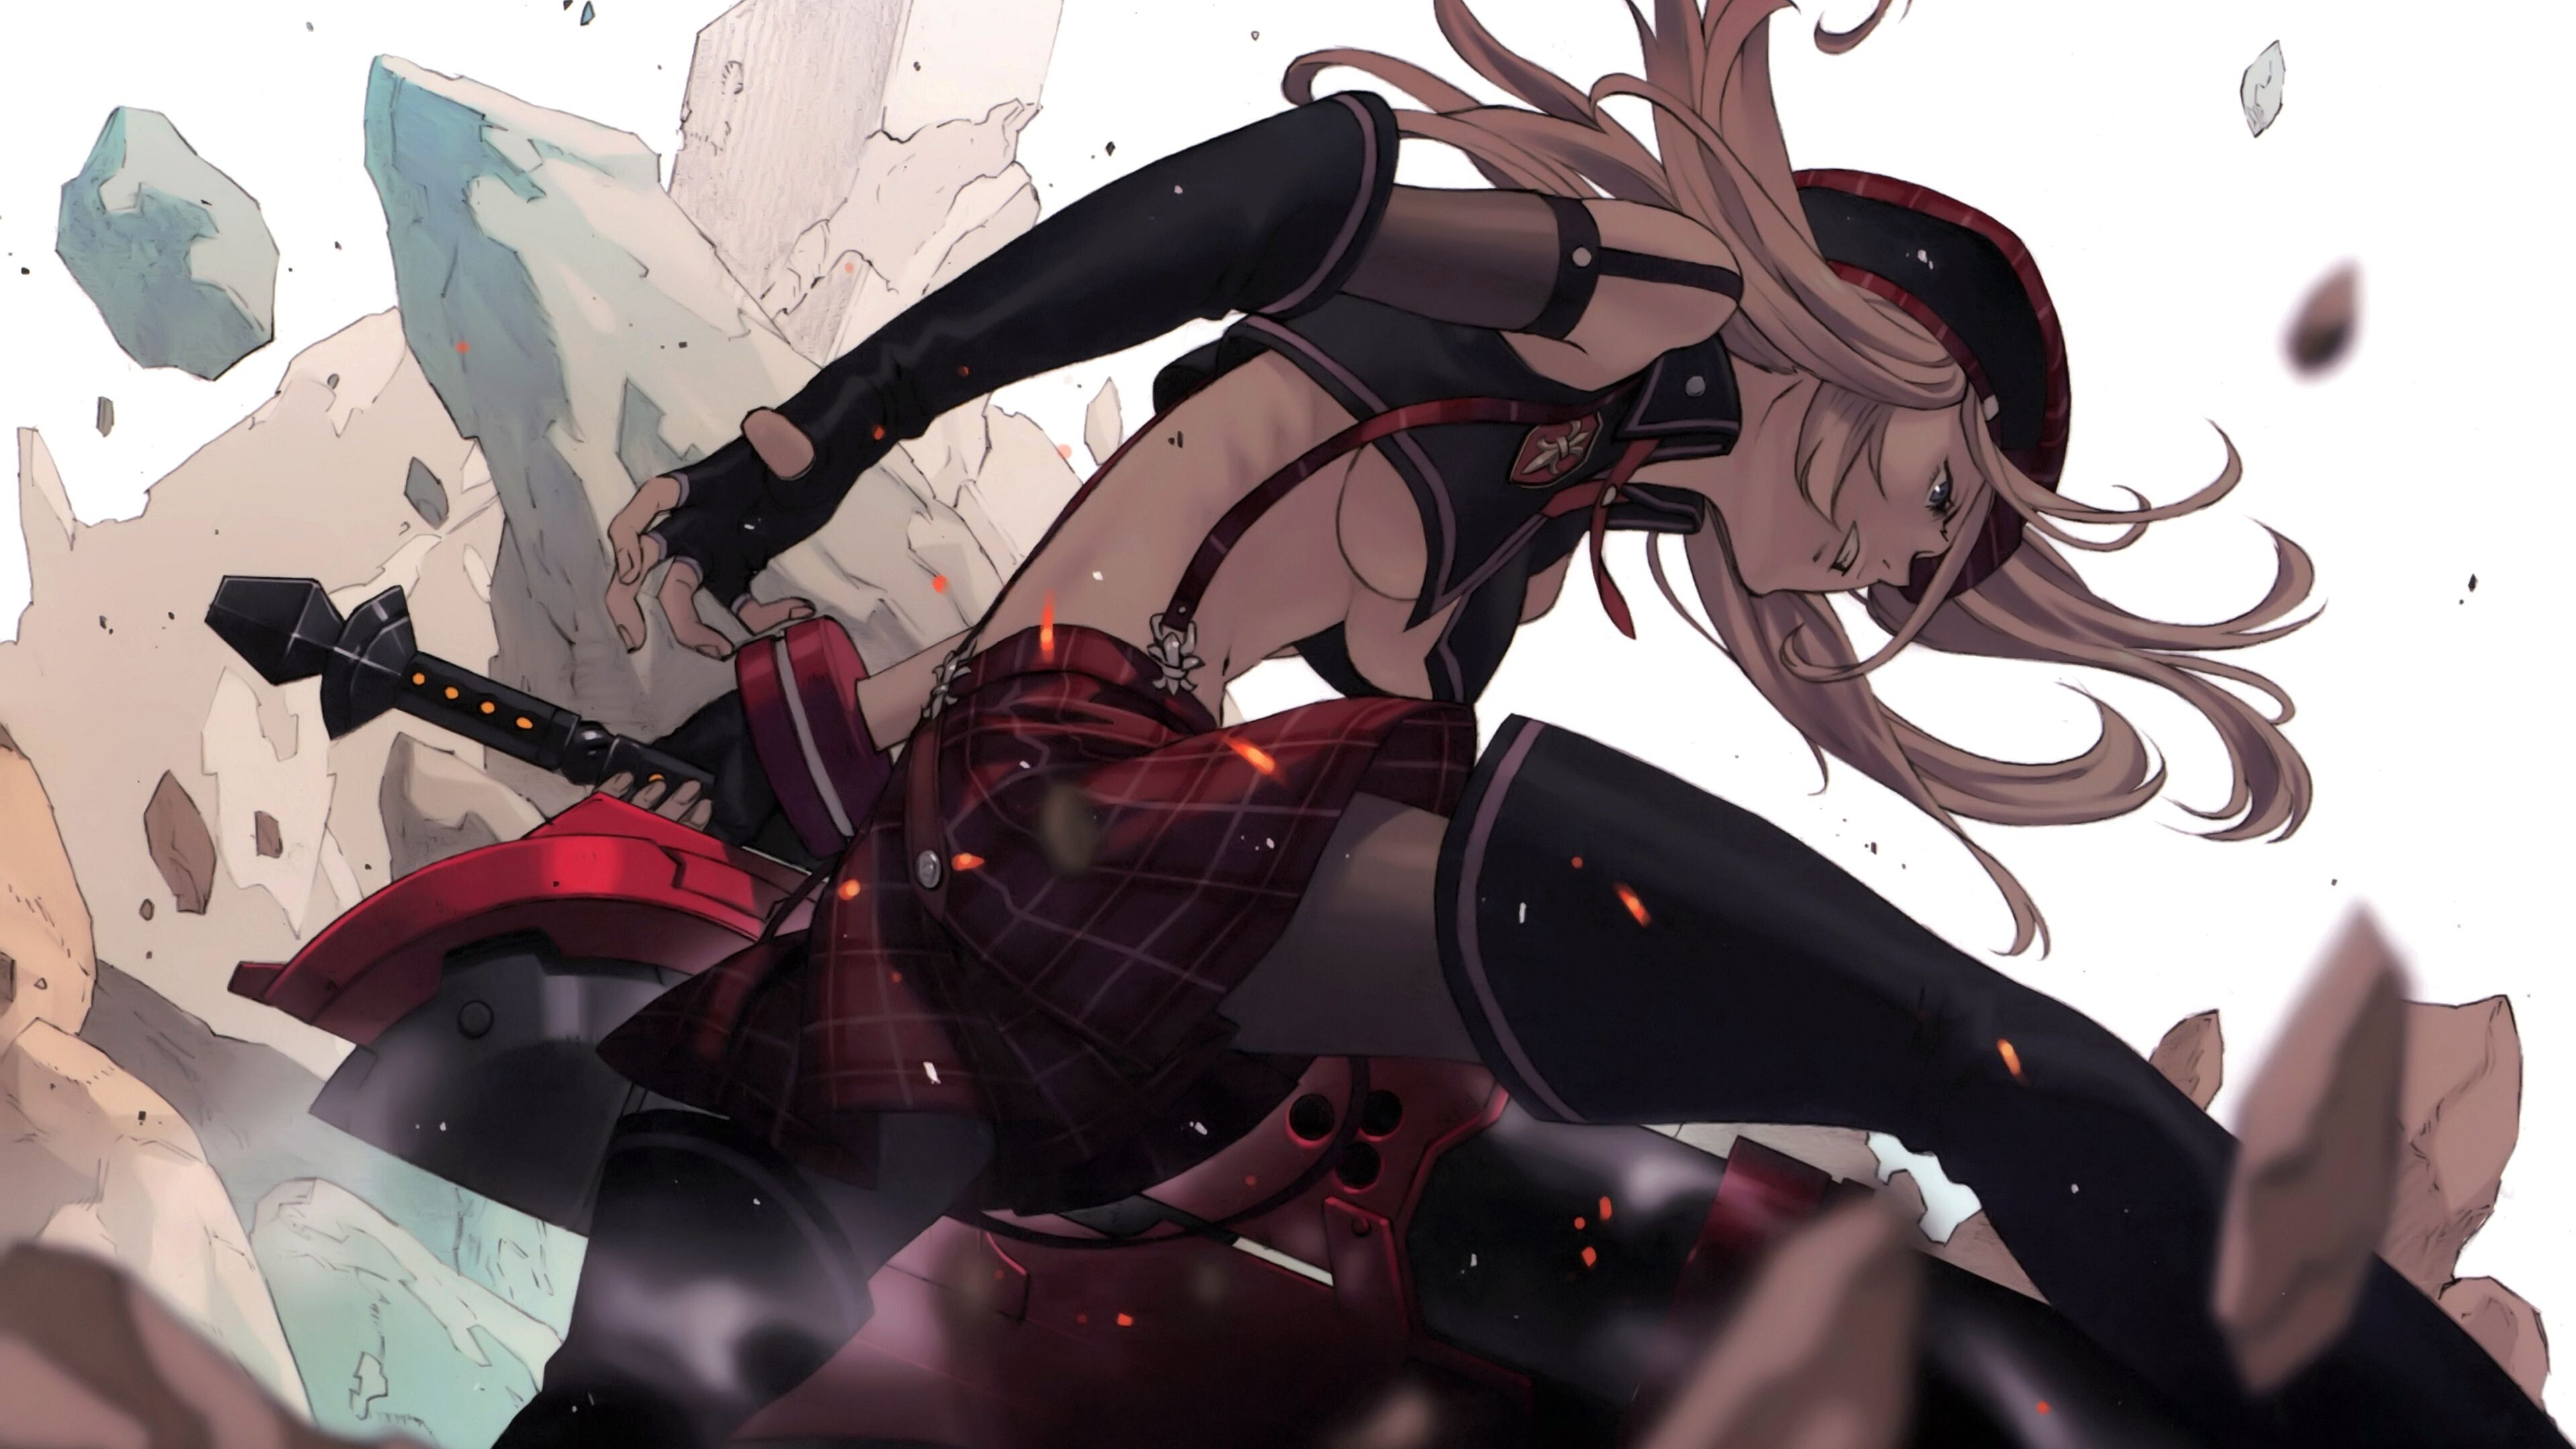 God Eater (TV series): Alisa Ilinichina Amiella, An arrogant person who always says what's on her mind. 3840x2160 4K Wallpaper.